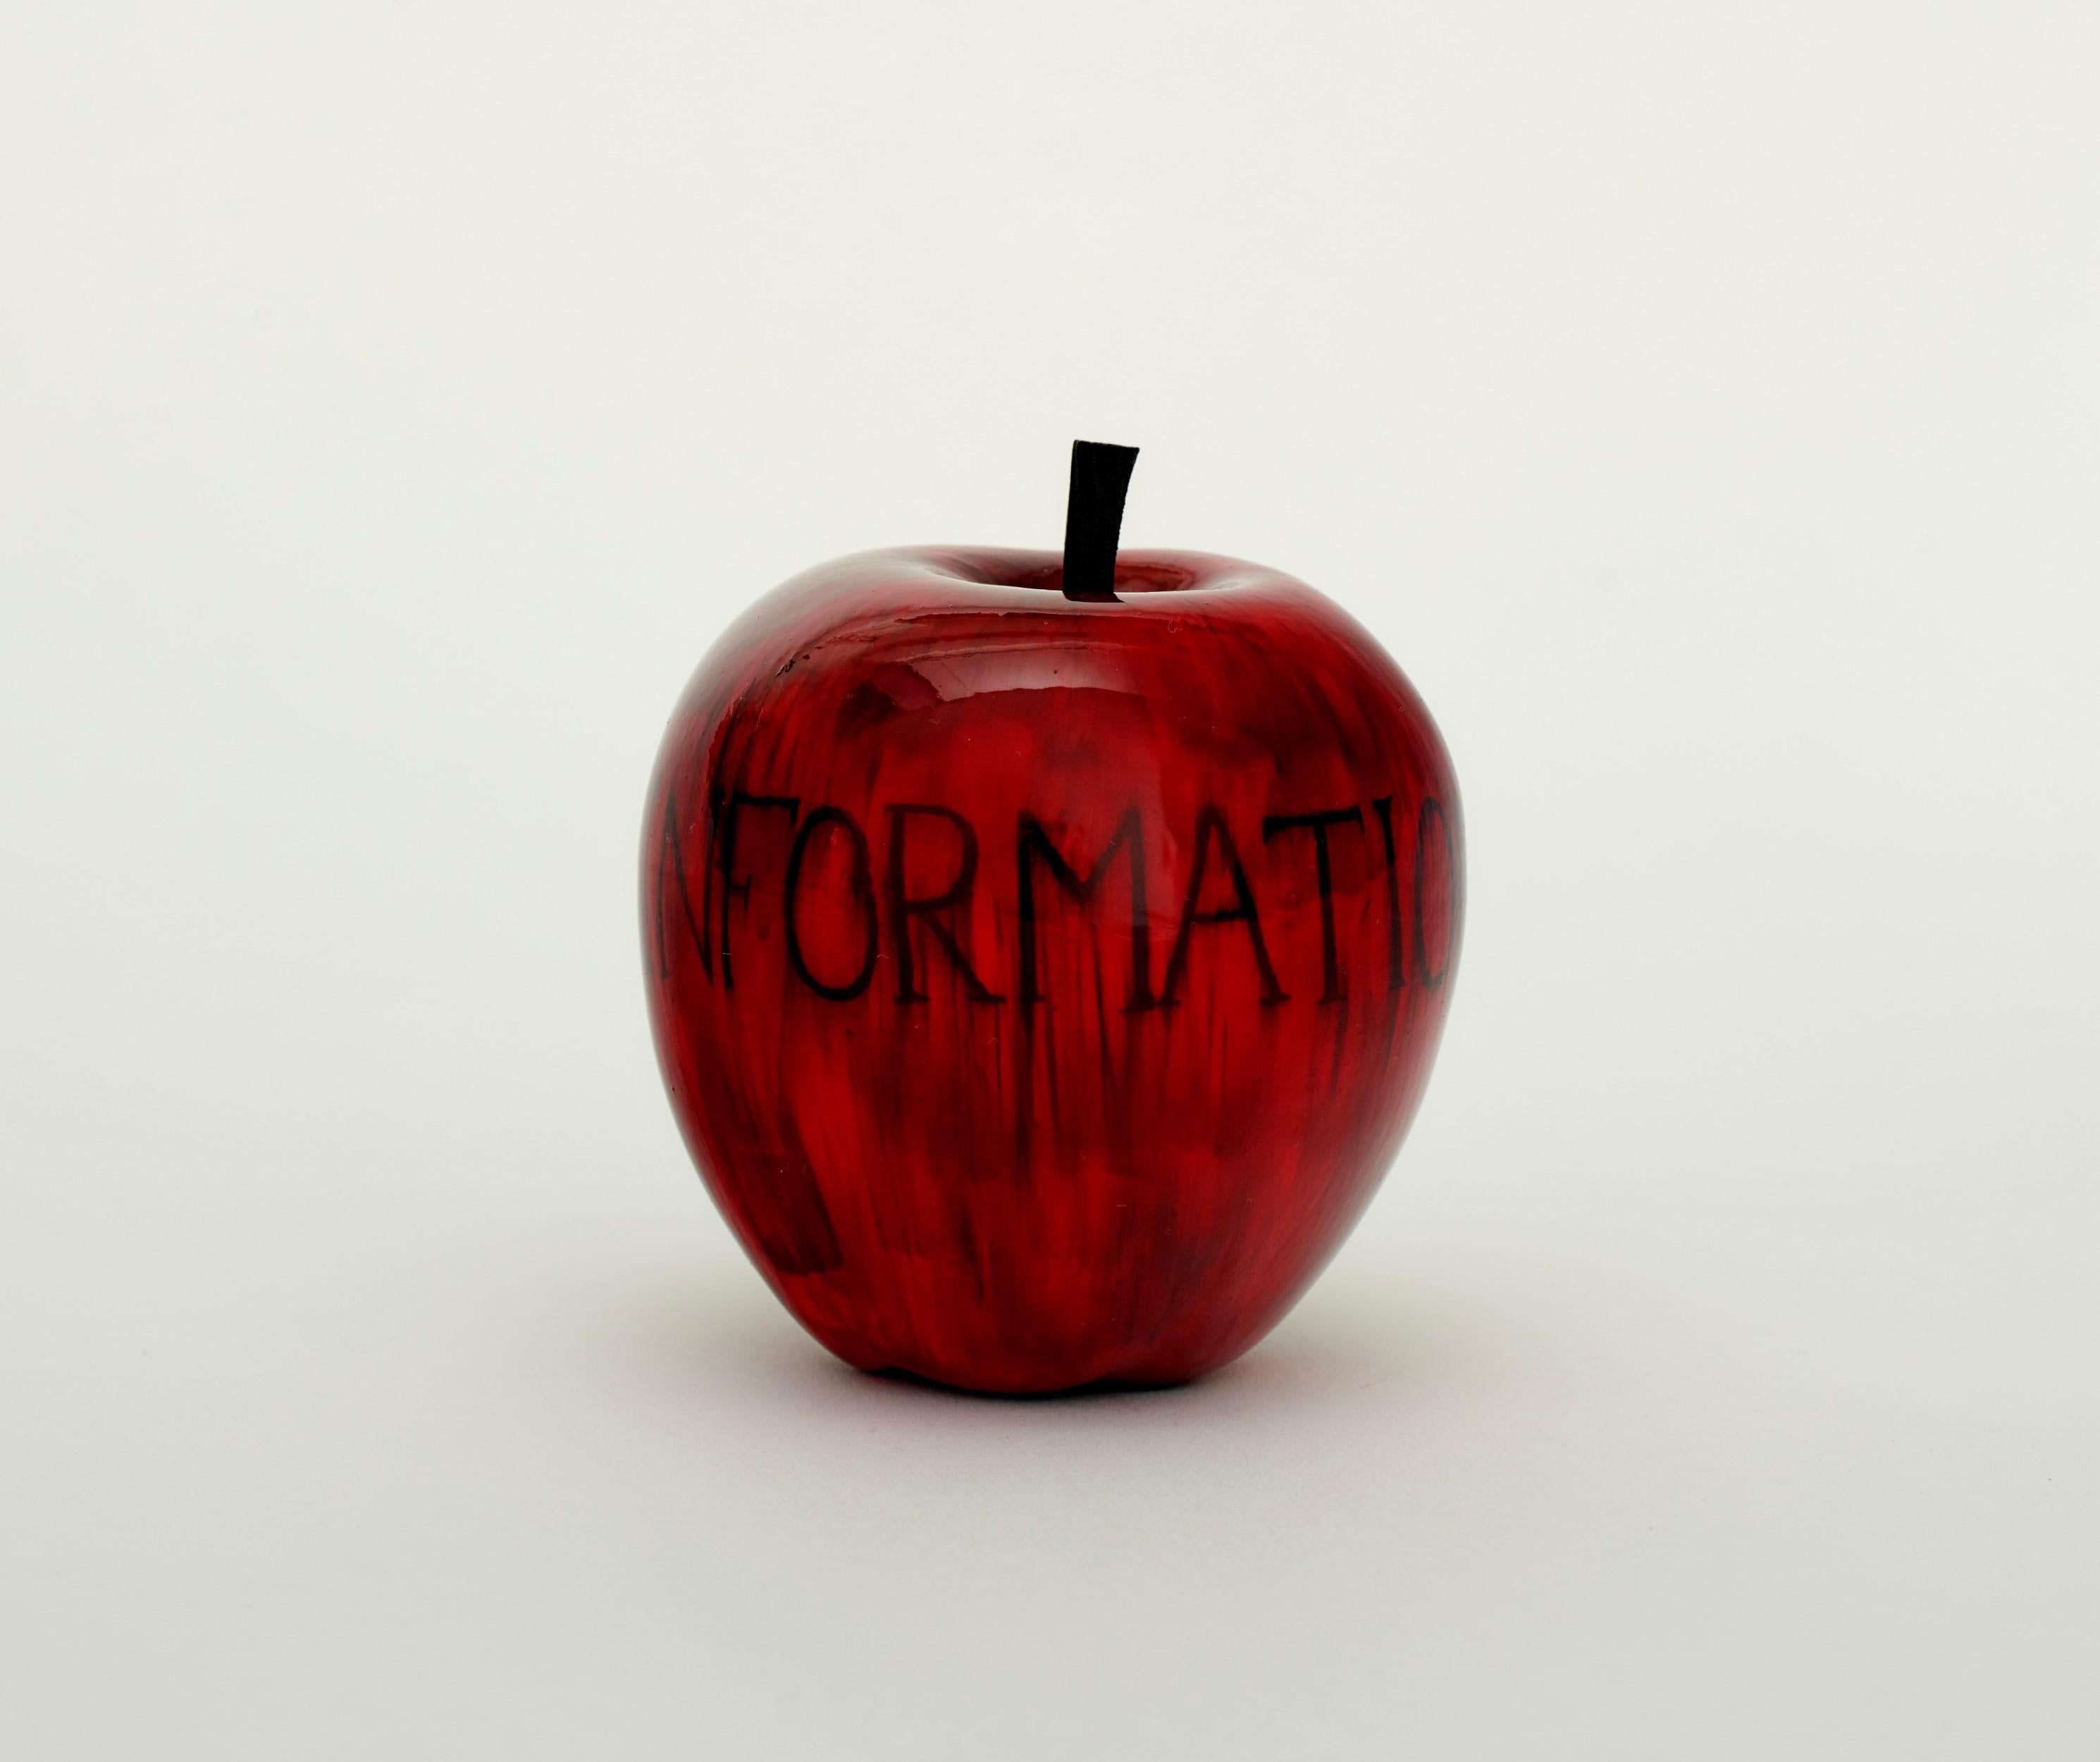 Information (Apple) - Sculpture by Barnaby Barford